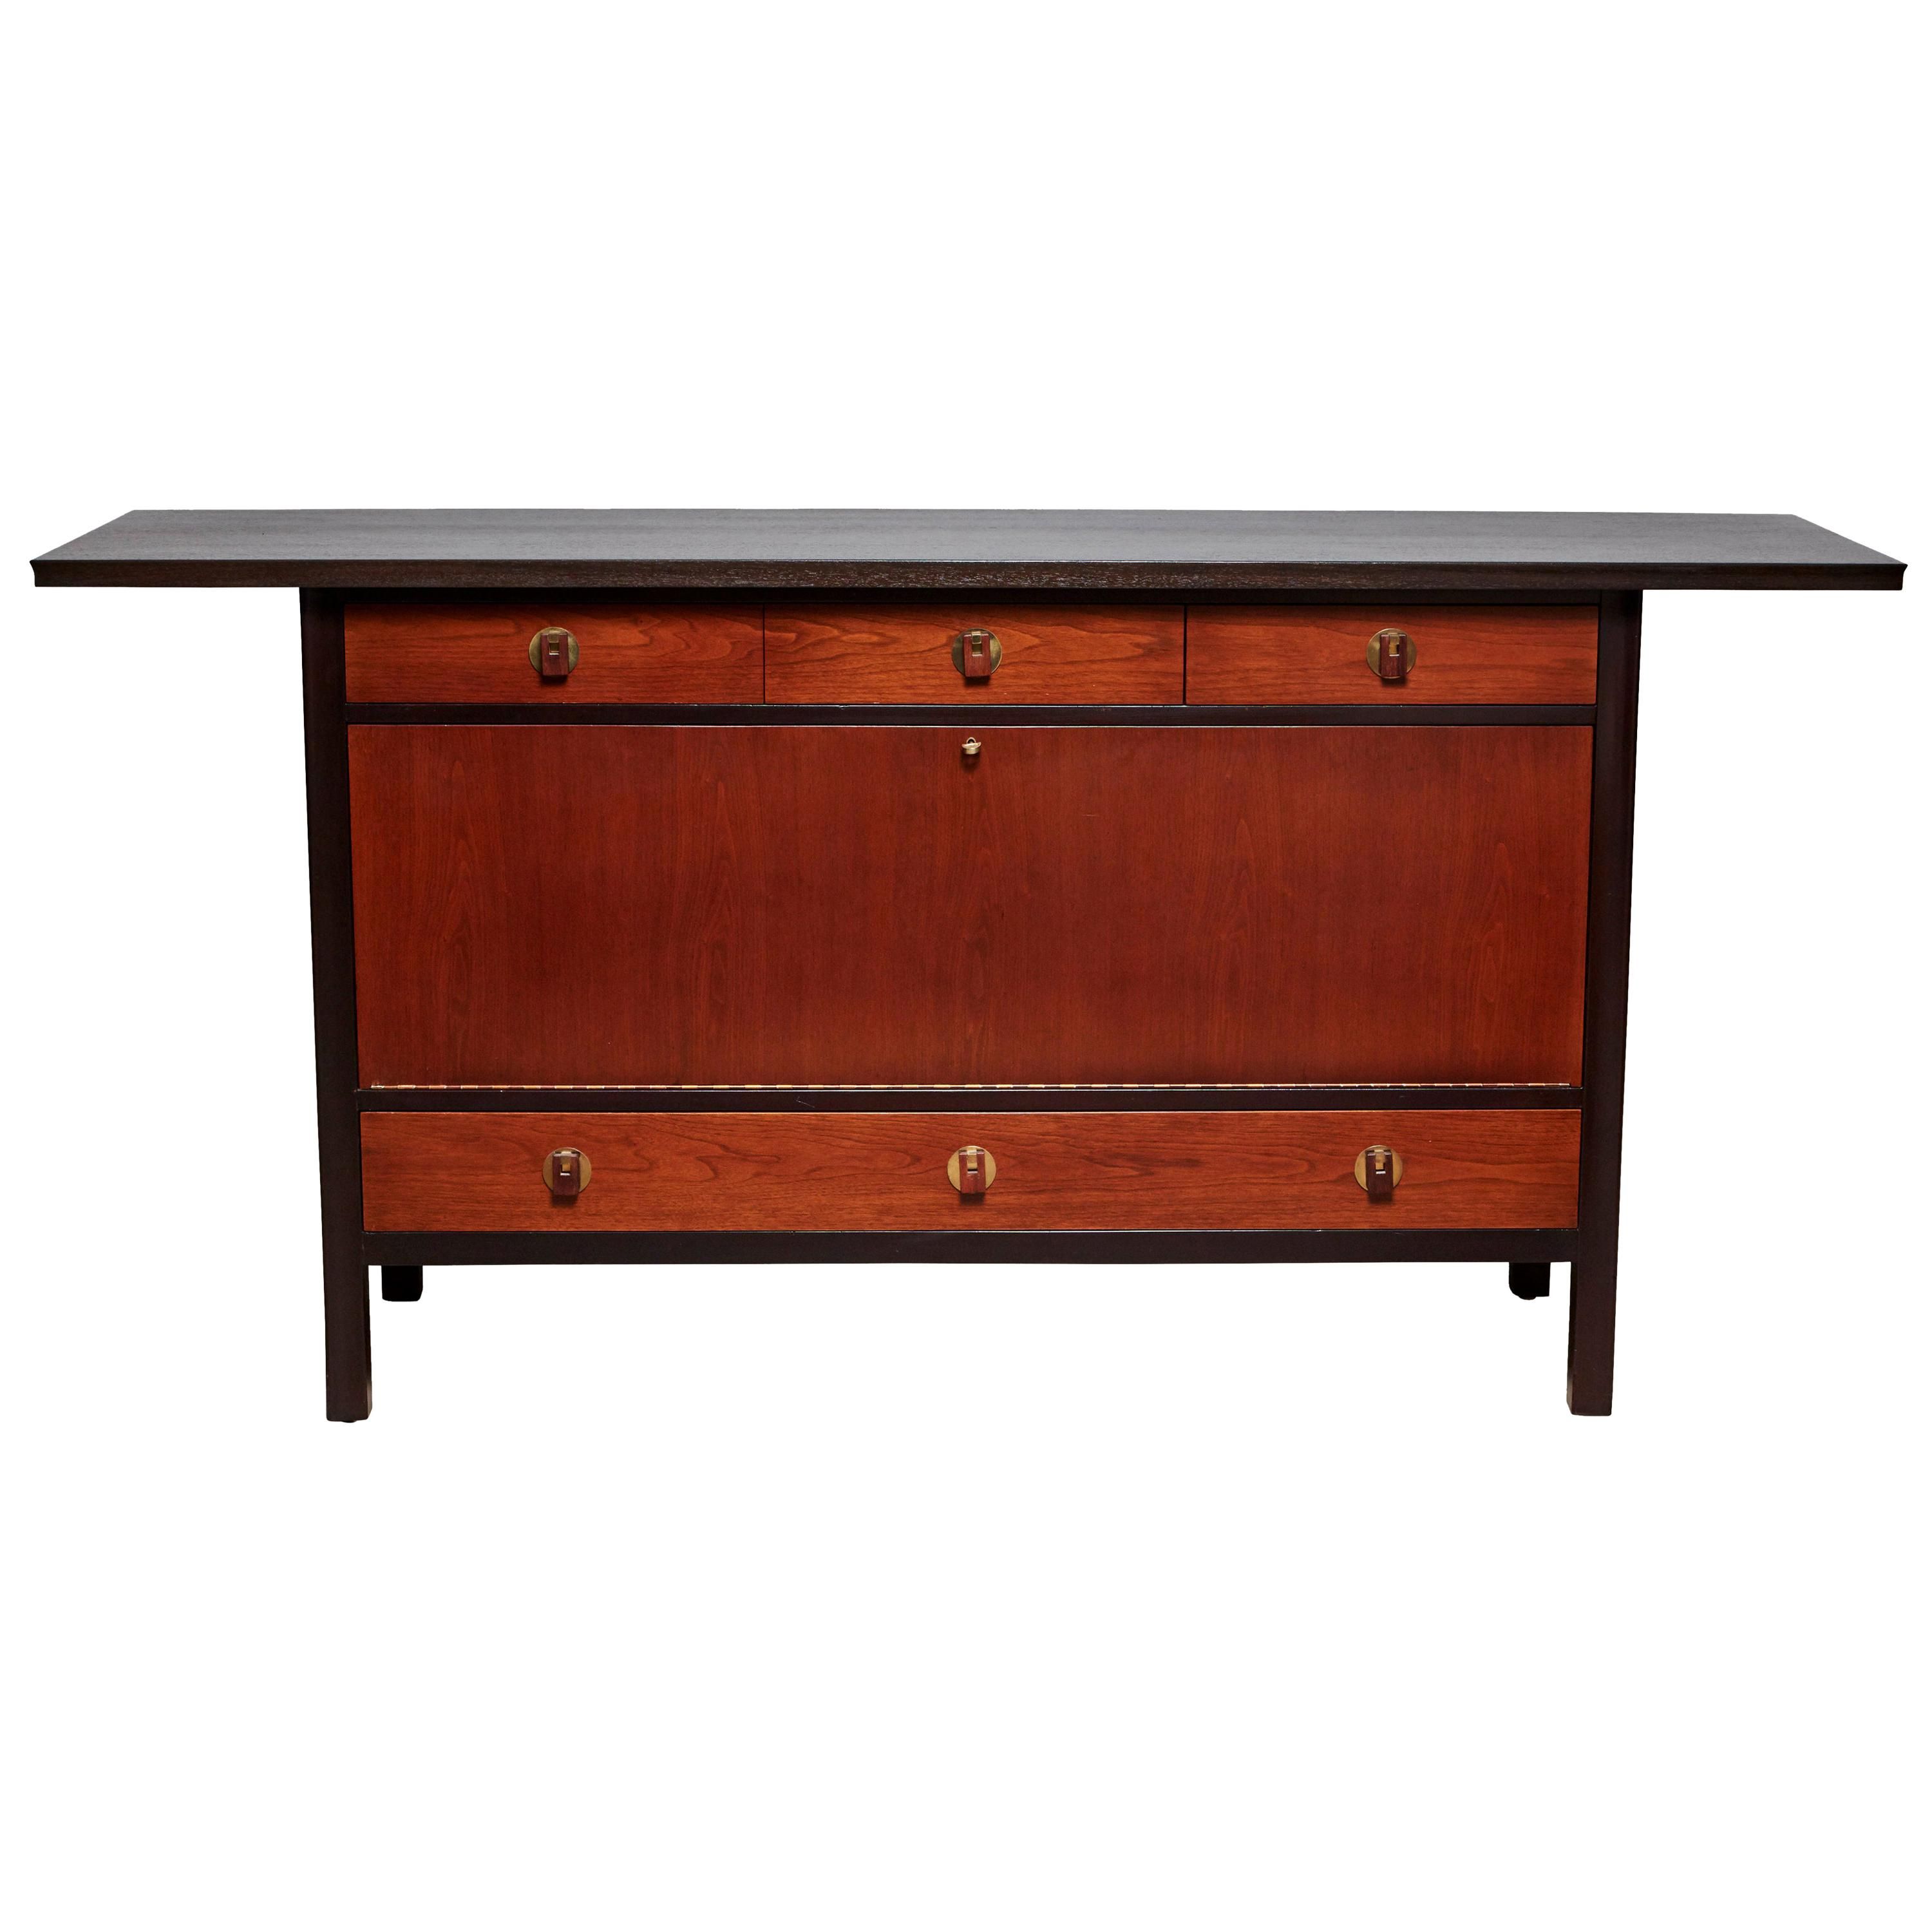 Lawson Fenning Furniture – 1stdibs With Regard To Most Up To Date Shoreland Sideboards (View 19 of 20)